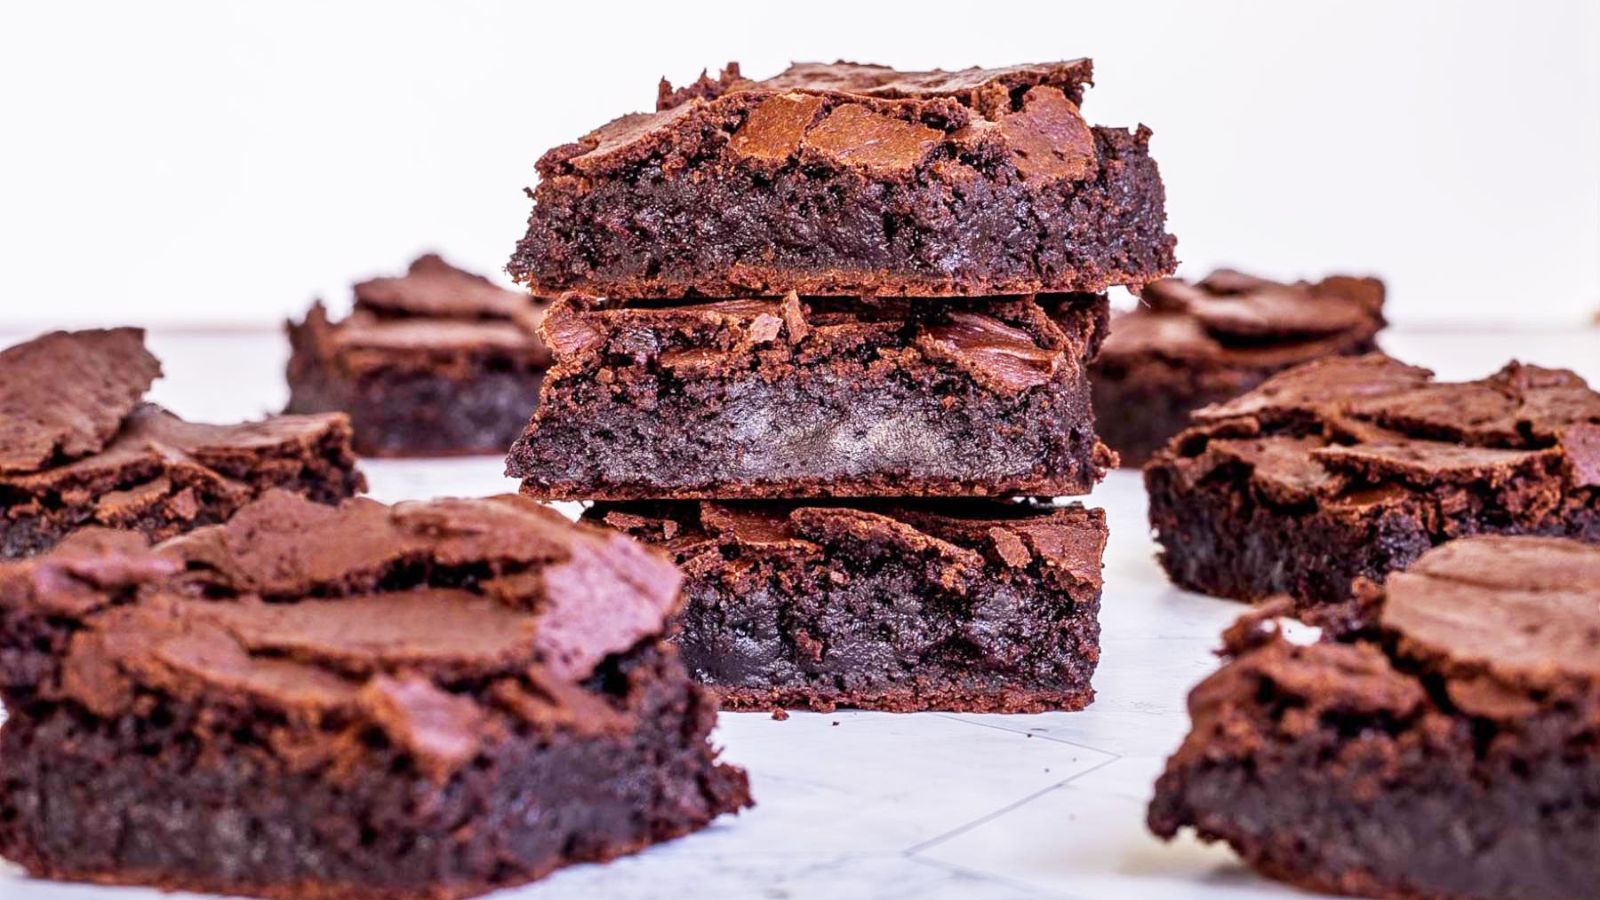 20 Effortless Dessert Recipes That’ll Have You Reaching For Seconds